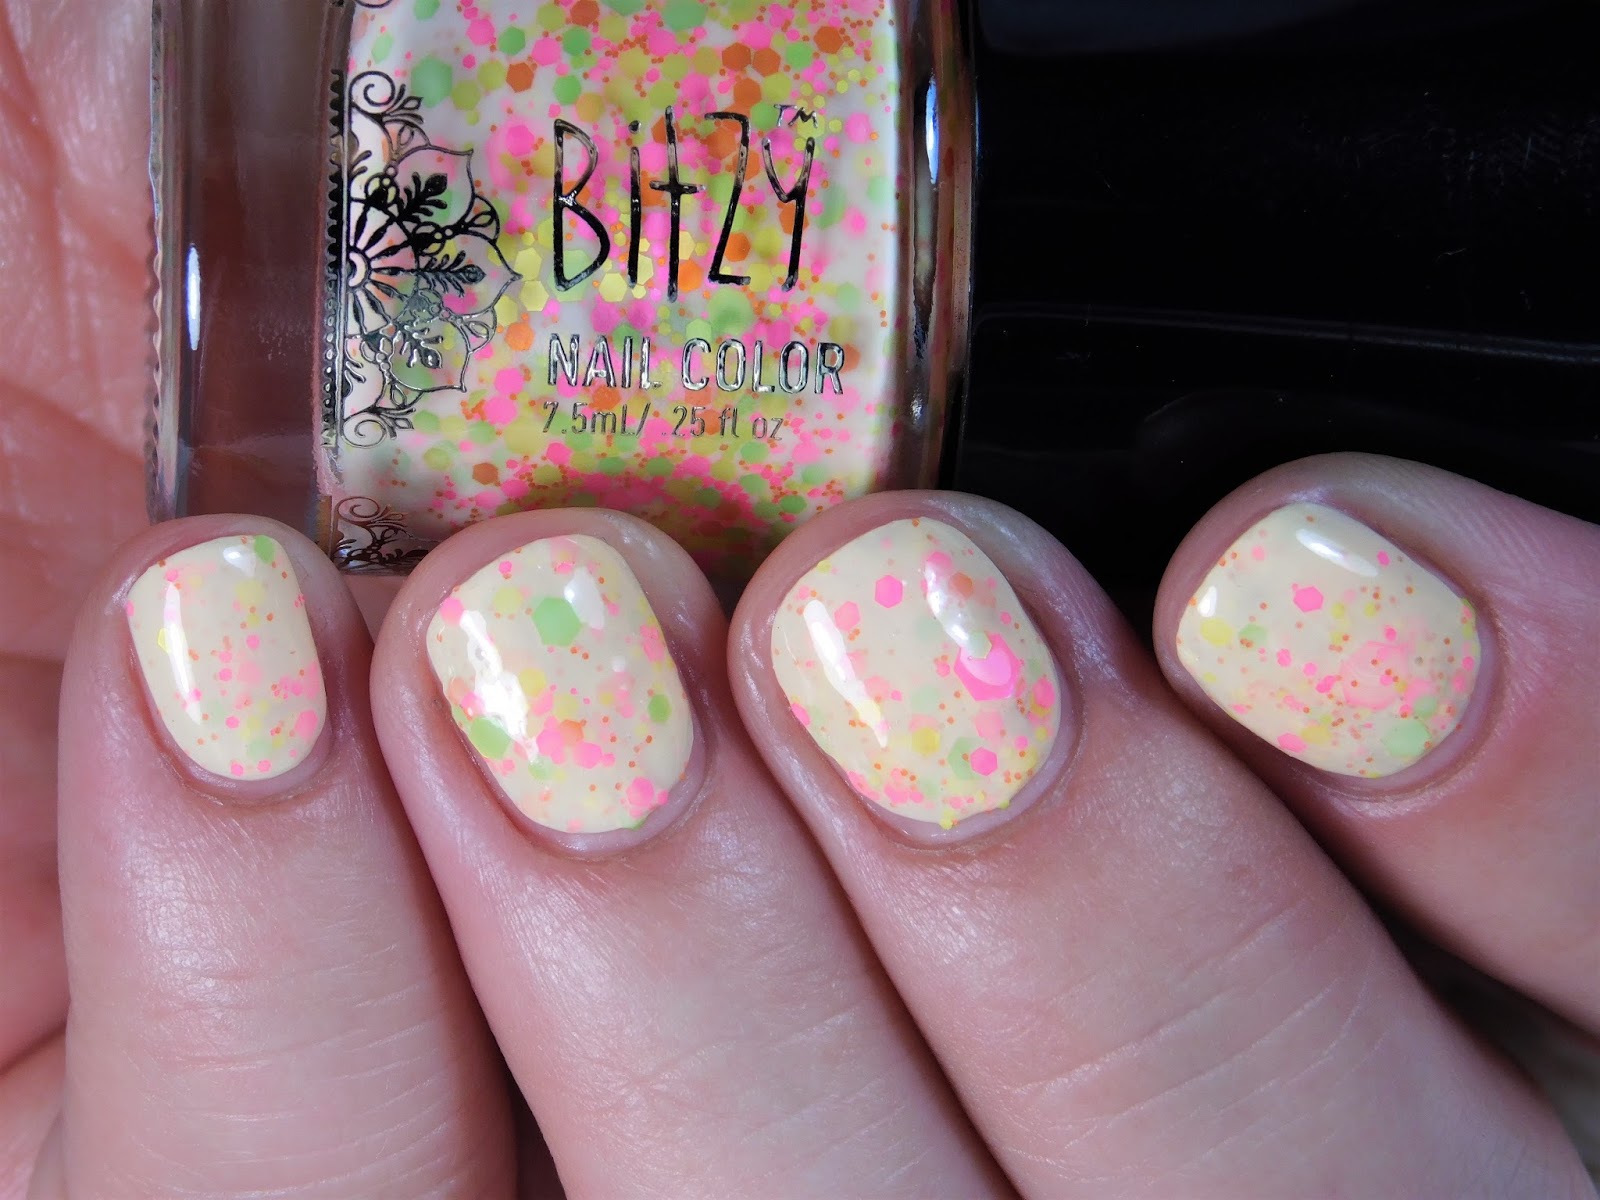 4. Bitzy Nail Polish Swatches in "Yes Please" Shade - wide 2